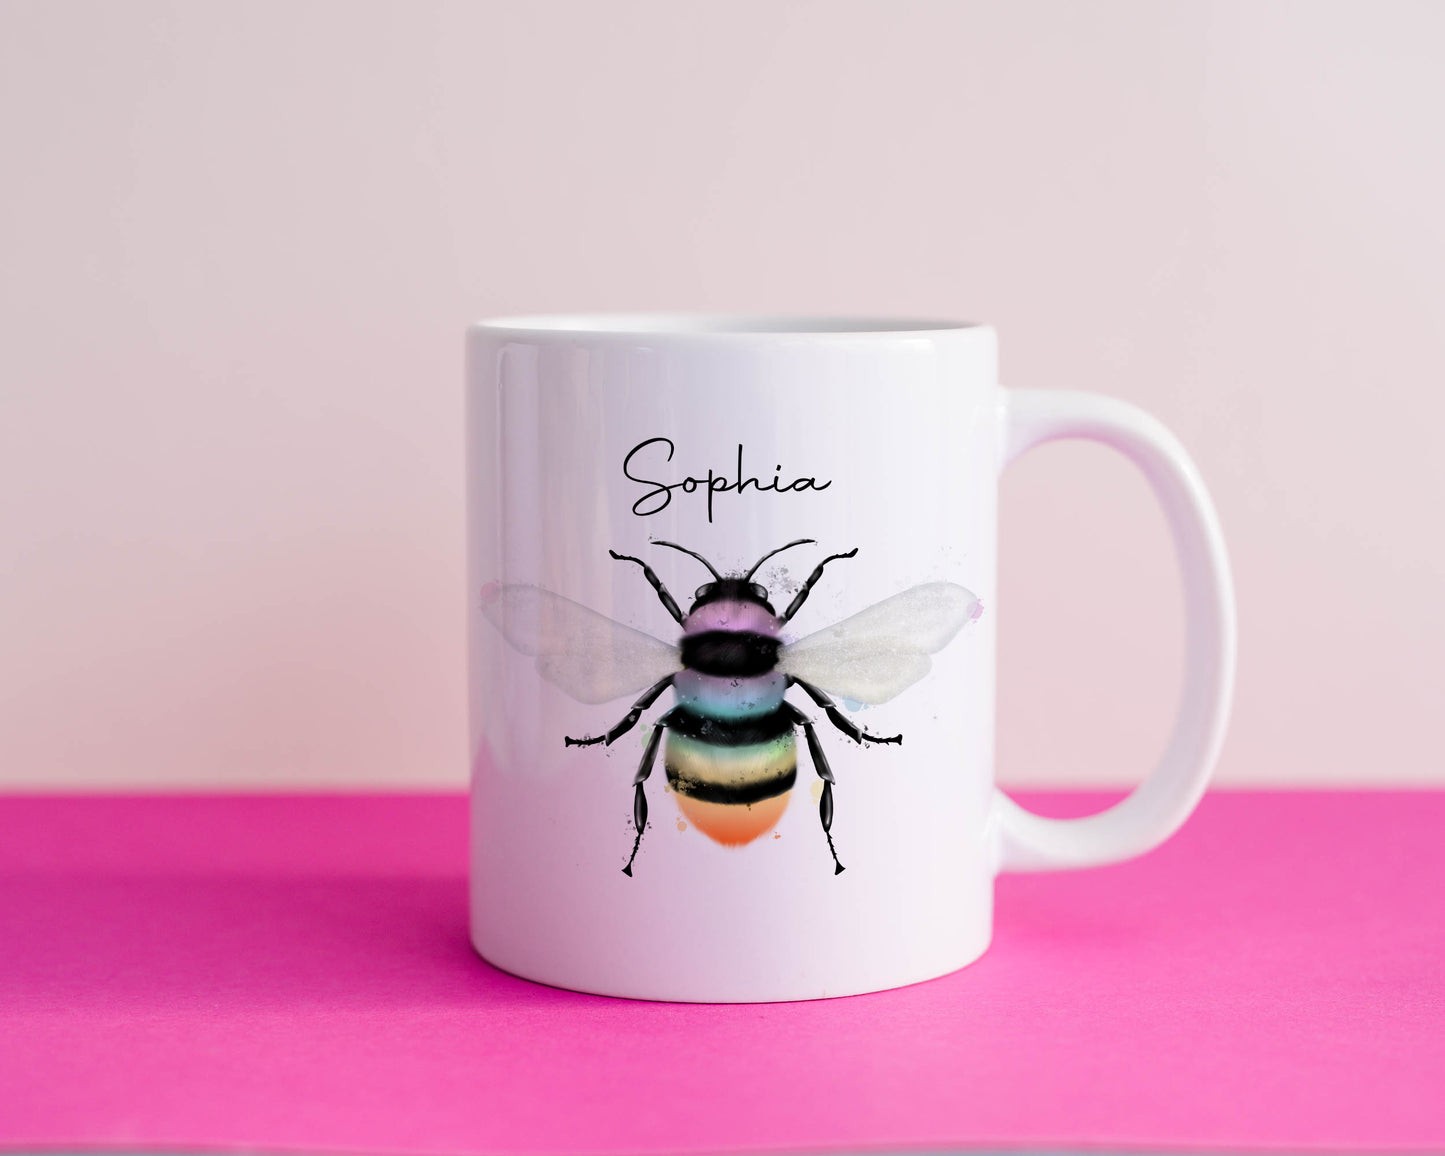 Ceramic mug with the design of a rainbow coloured bumble bee and can be personalised